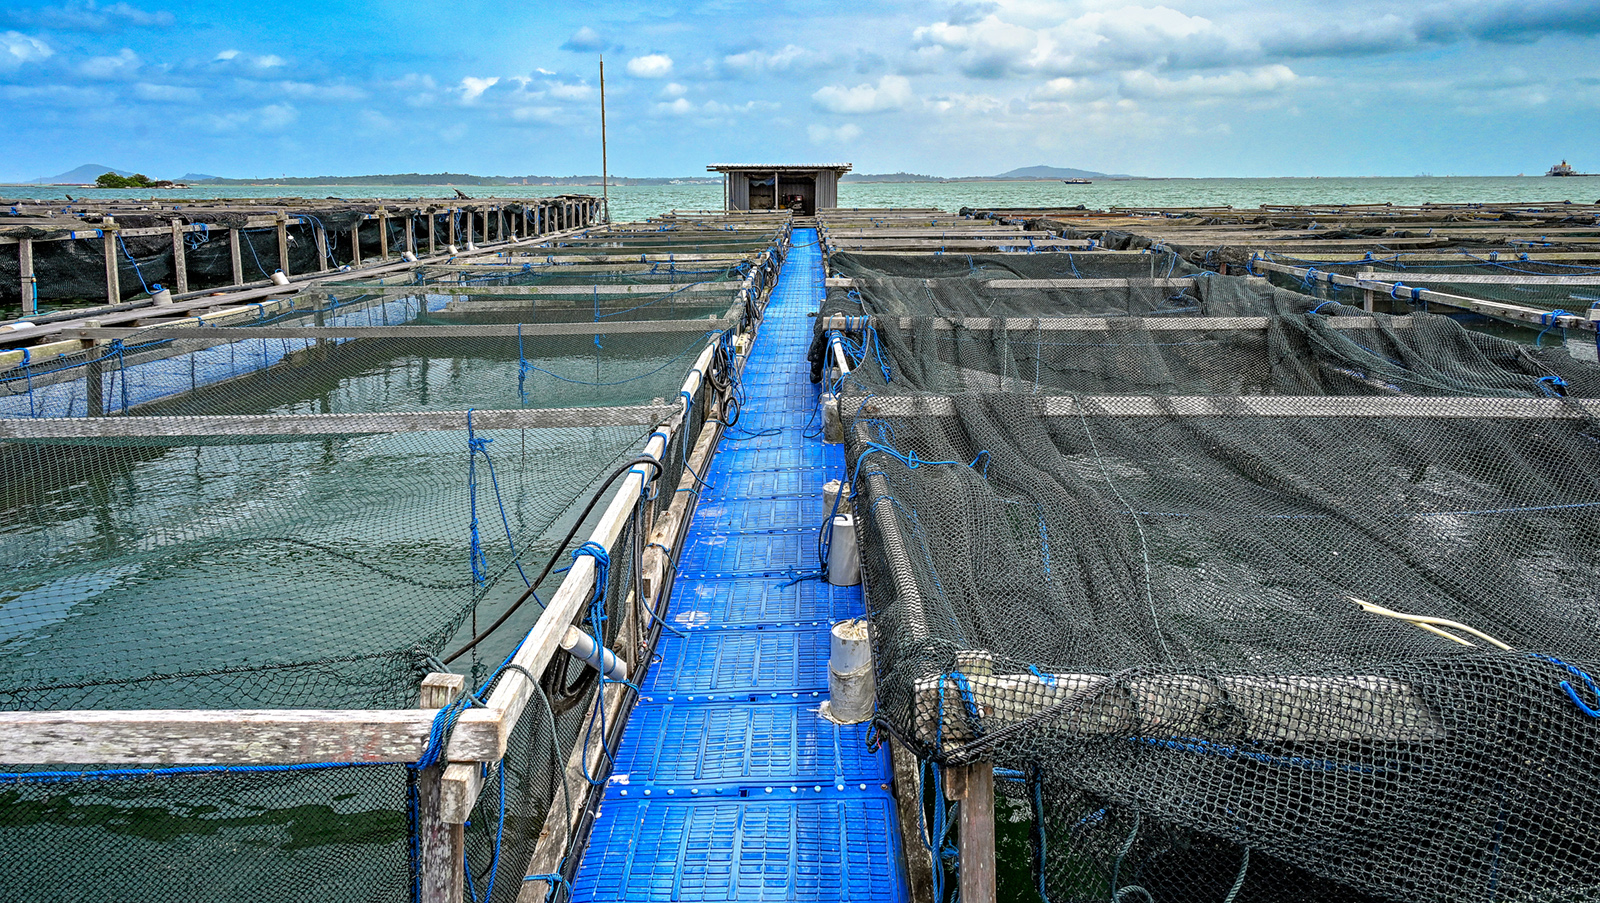 What inspired you to join the aquaculture industry? Image